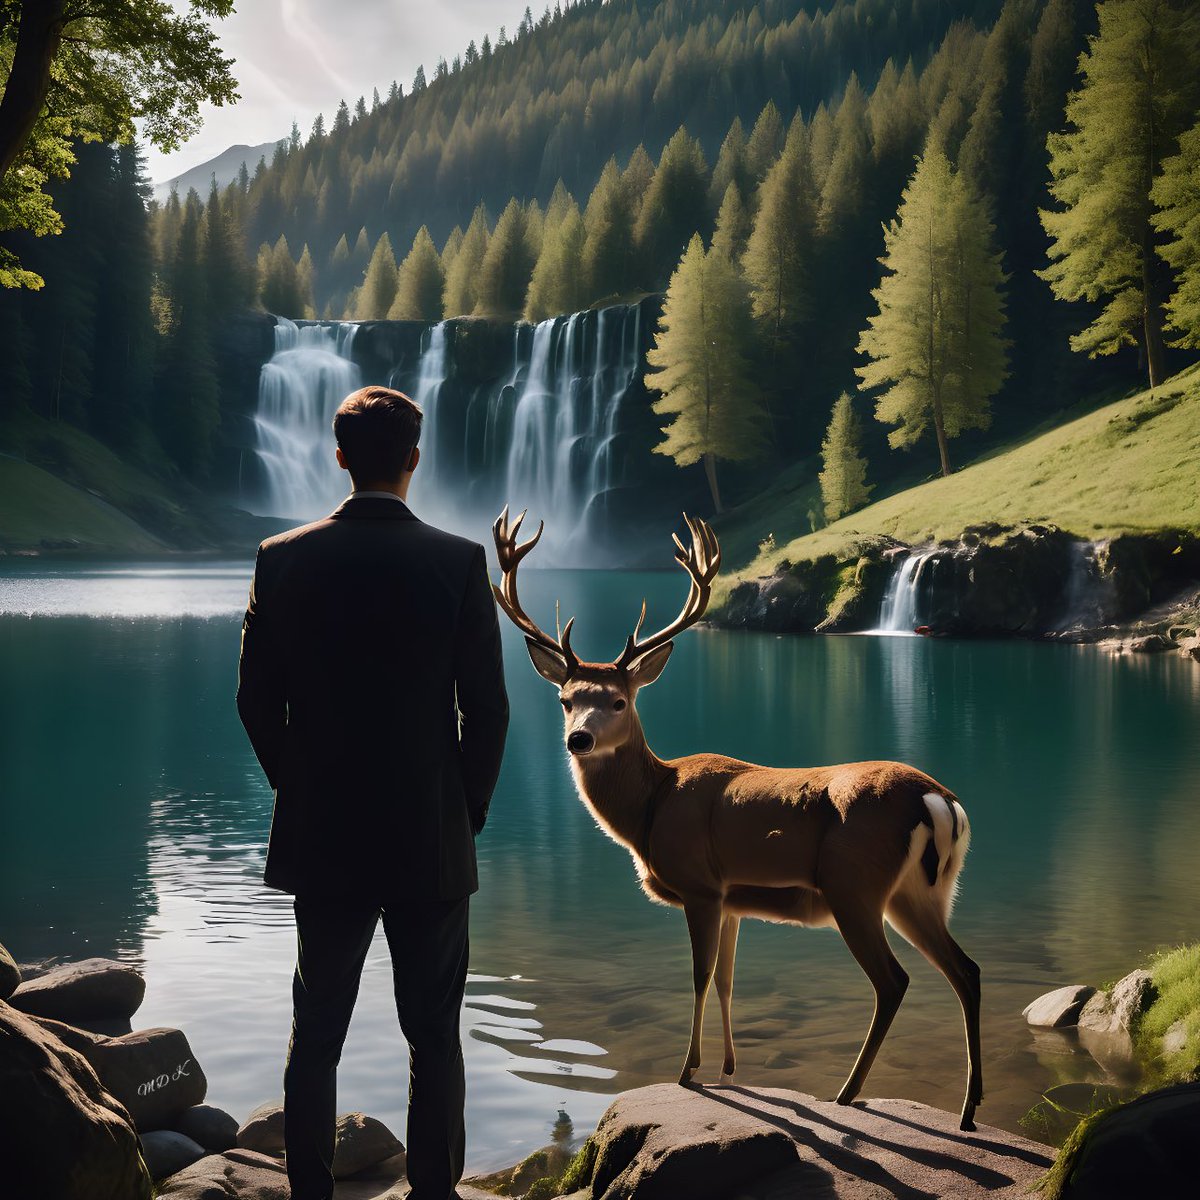 Just me and a deer, well and waterfalls 😜 #MyAiArt